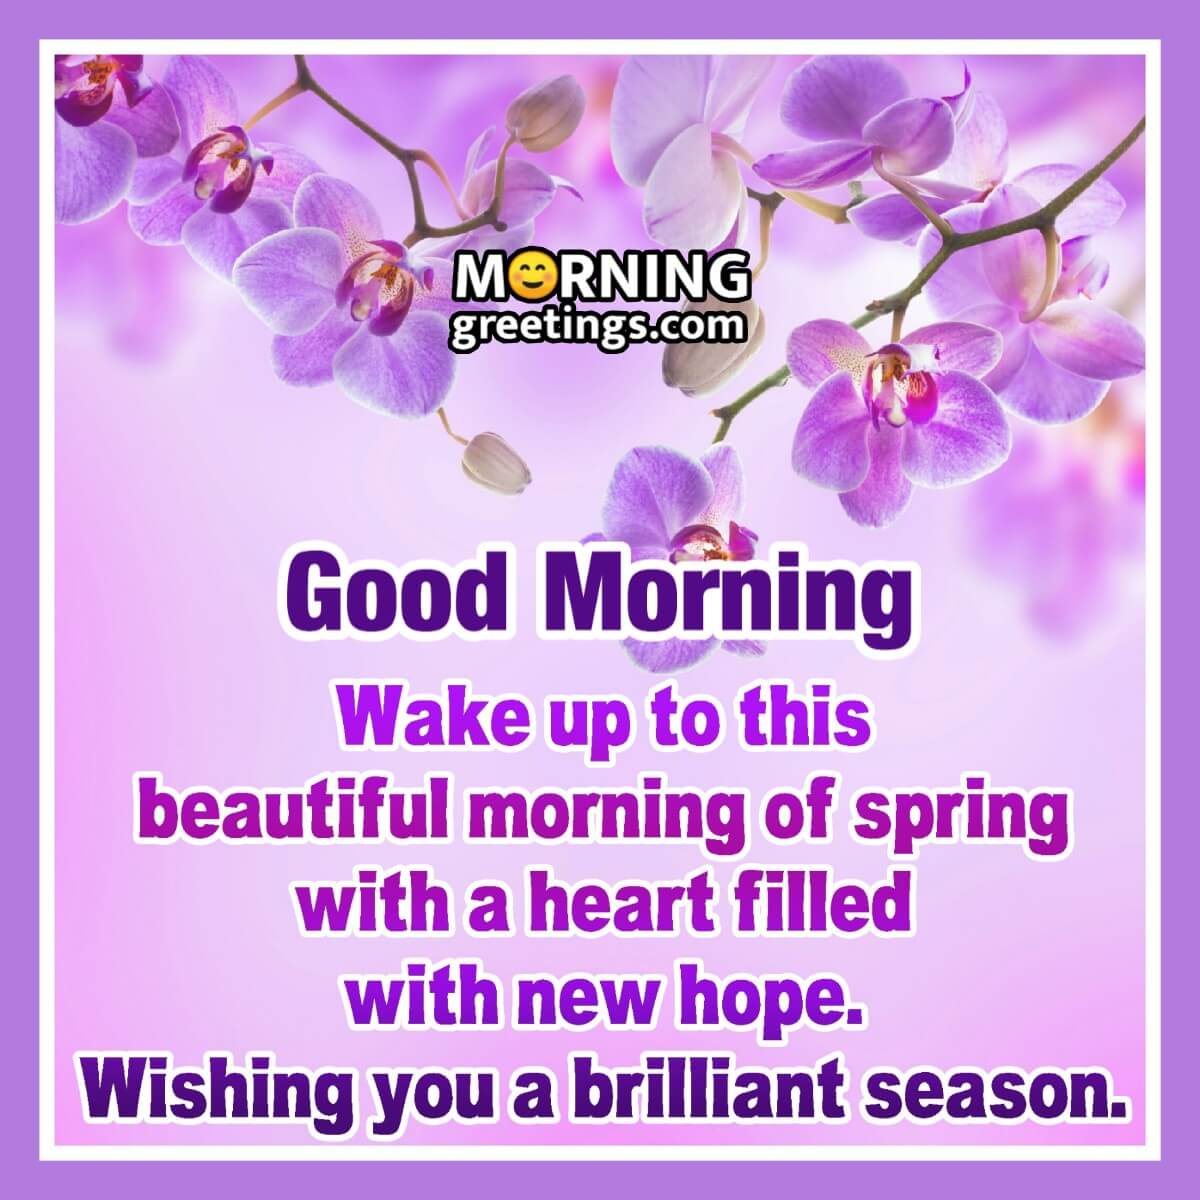 Good Morning Wishing You A Brilliant Spring